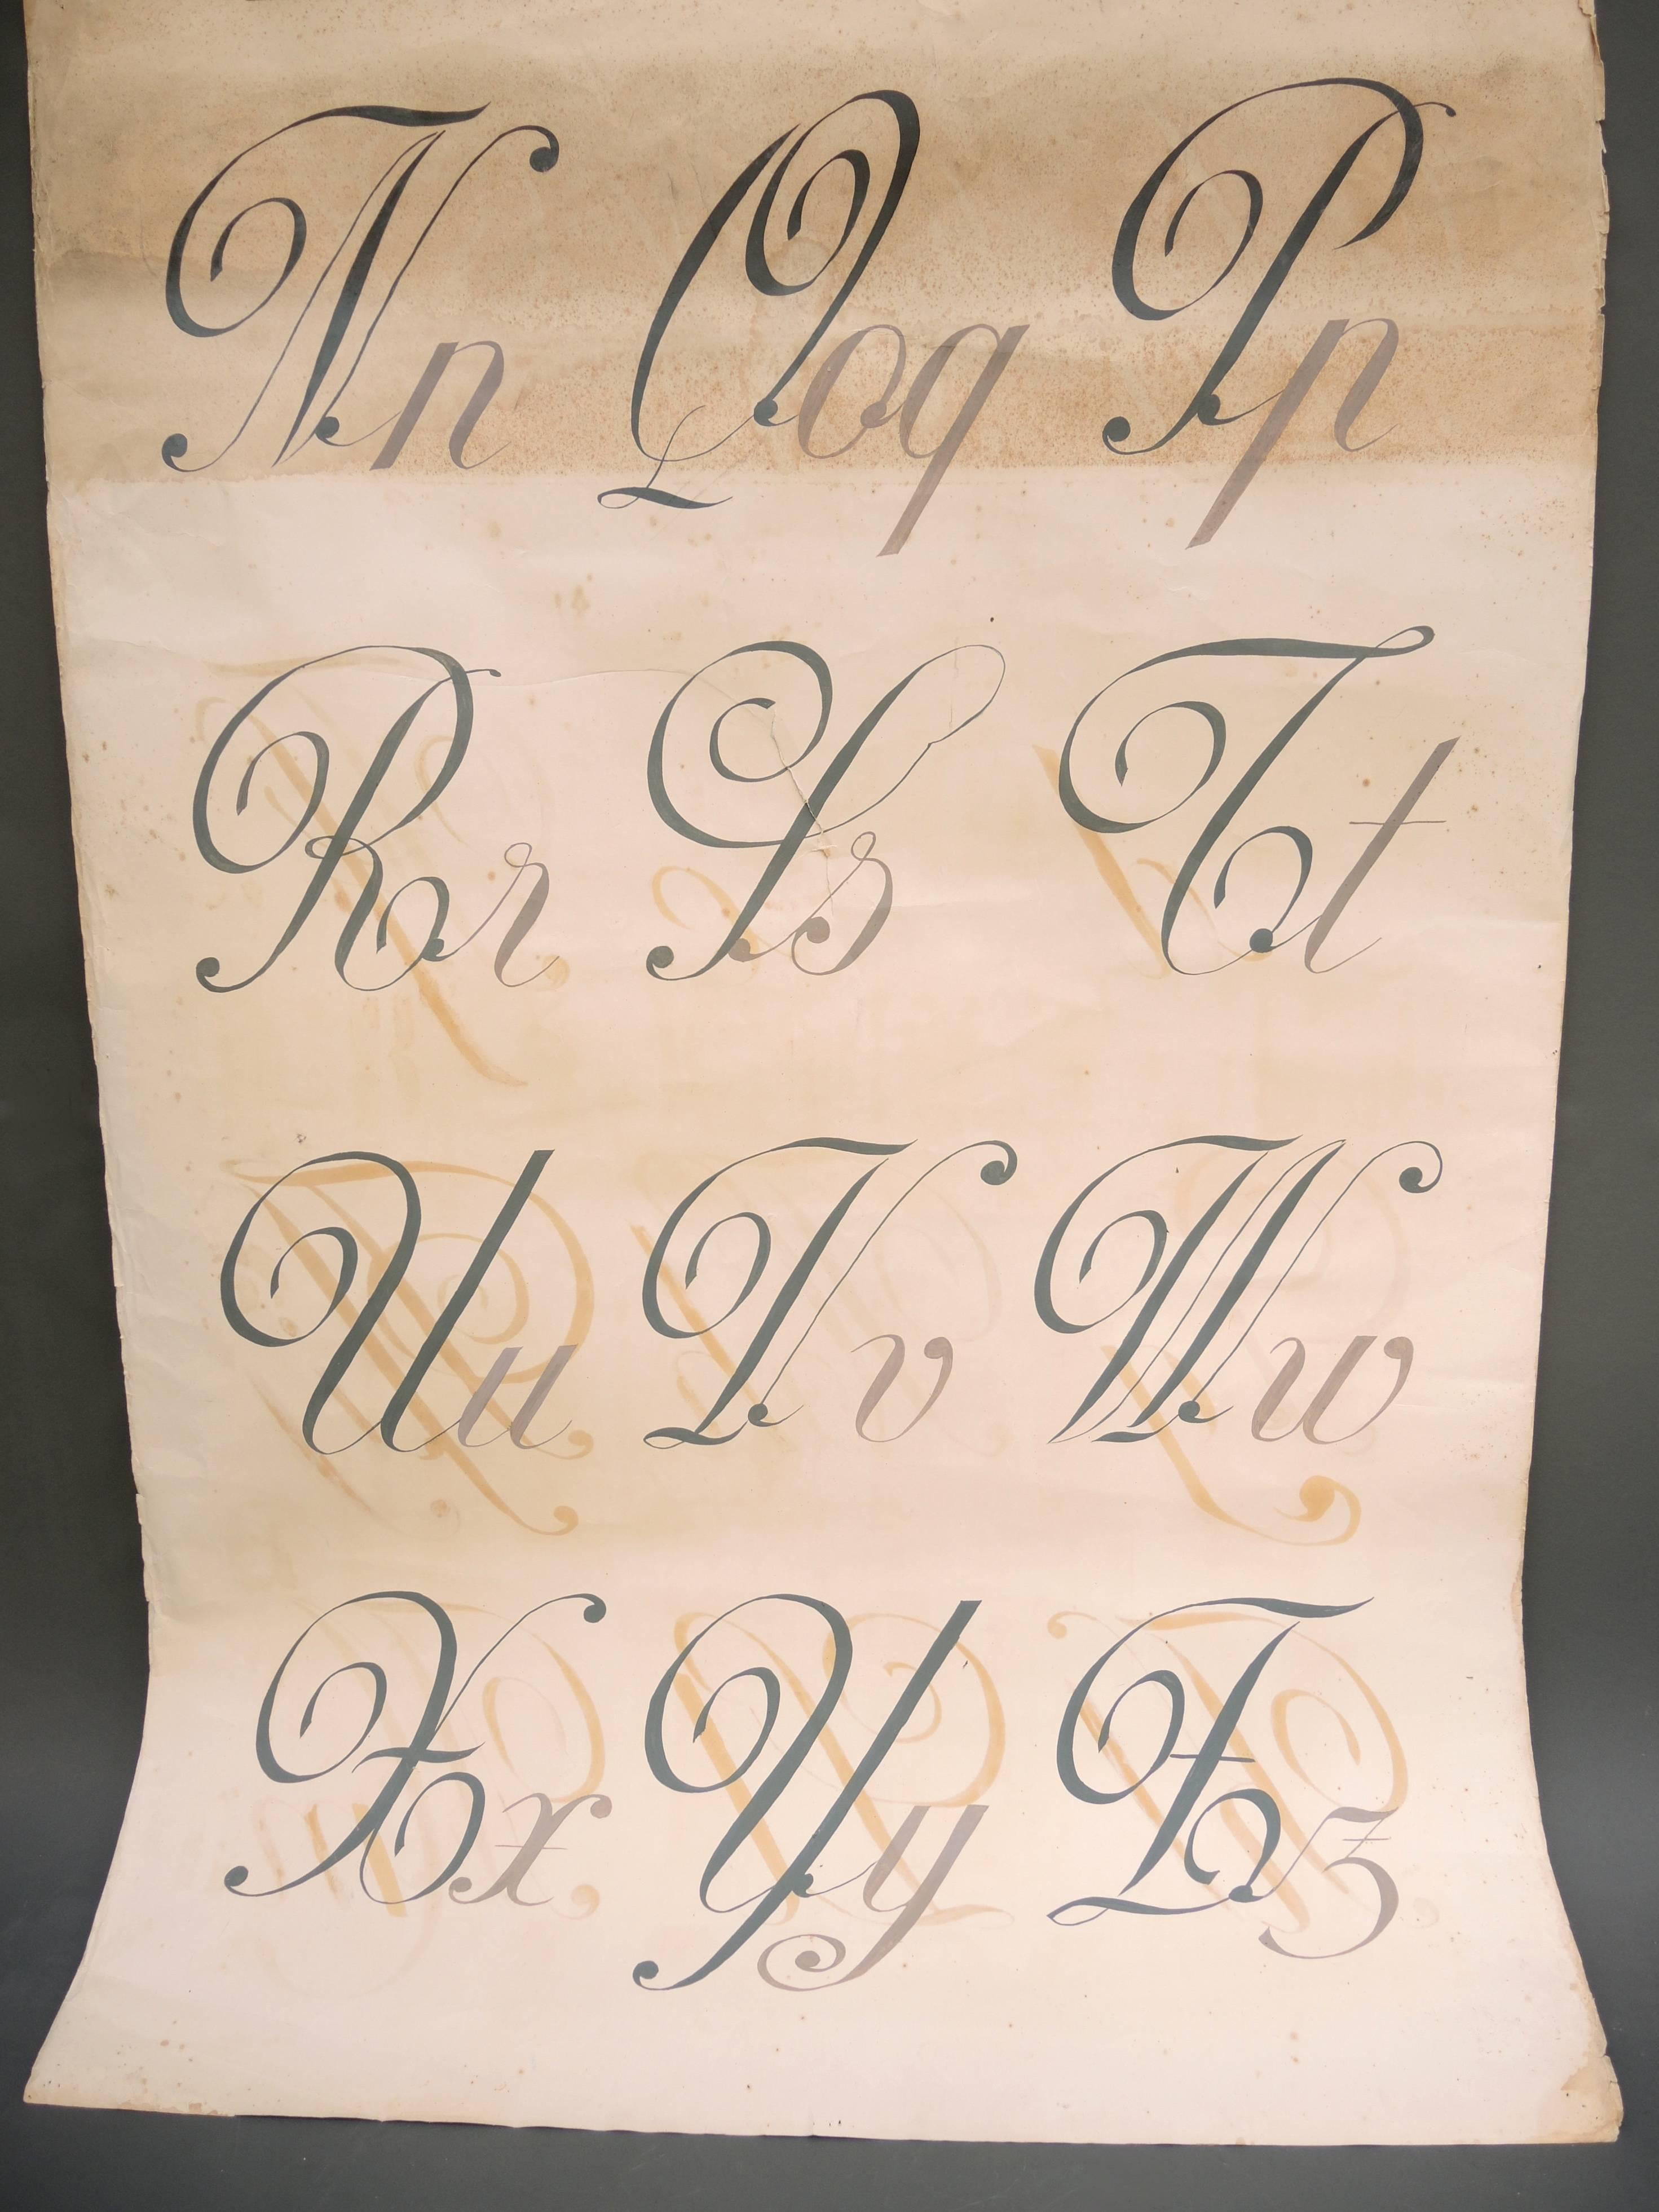 Double sided hand-painted sign makers chart. The thick paper chart has hand-painted letters A-M on one side and N-Z on the other side. from the Belgian sign maker van Kerckhoven, circa 1930.
Unframed and shipped rolled.